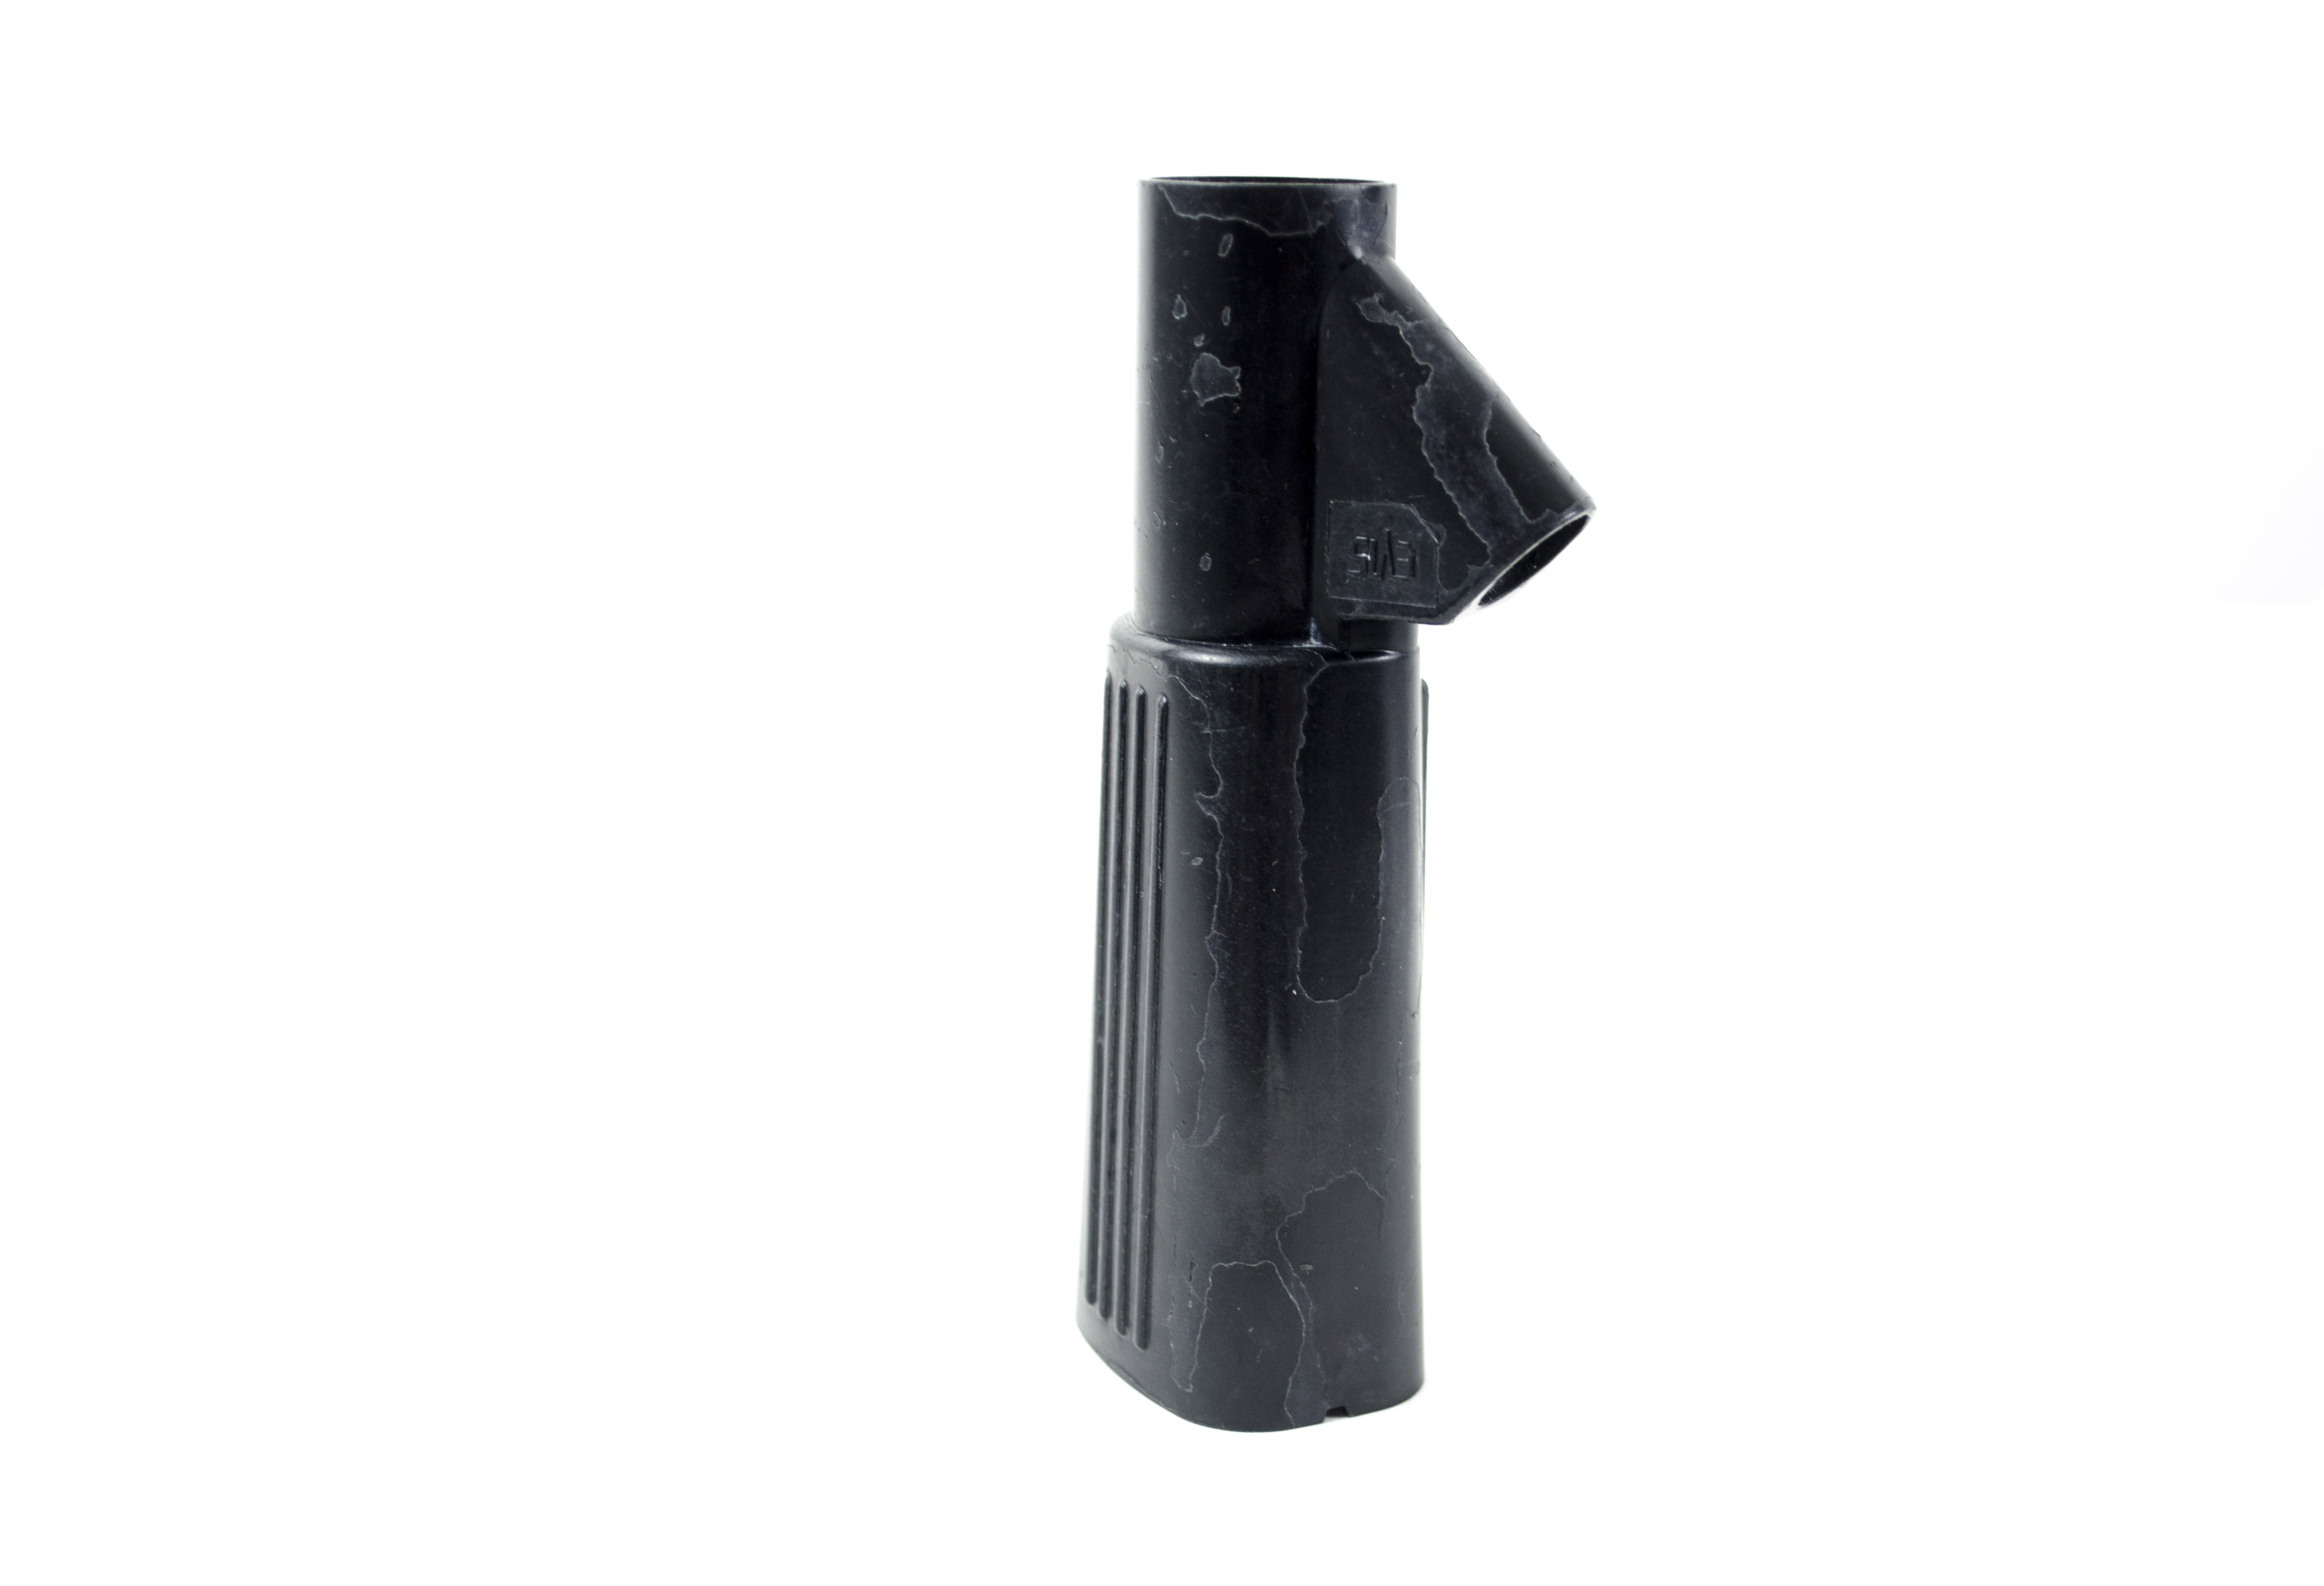 OEM Control Grip (Without Nameplate) - 140, 240 Series